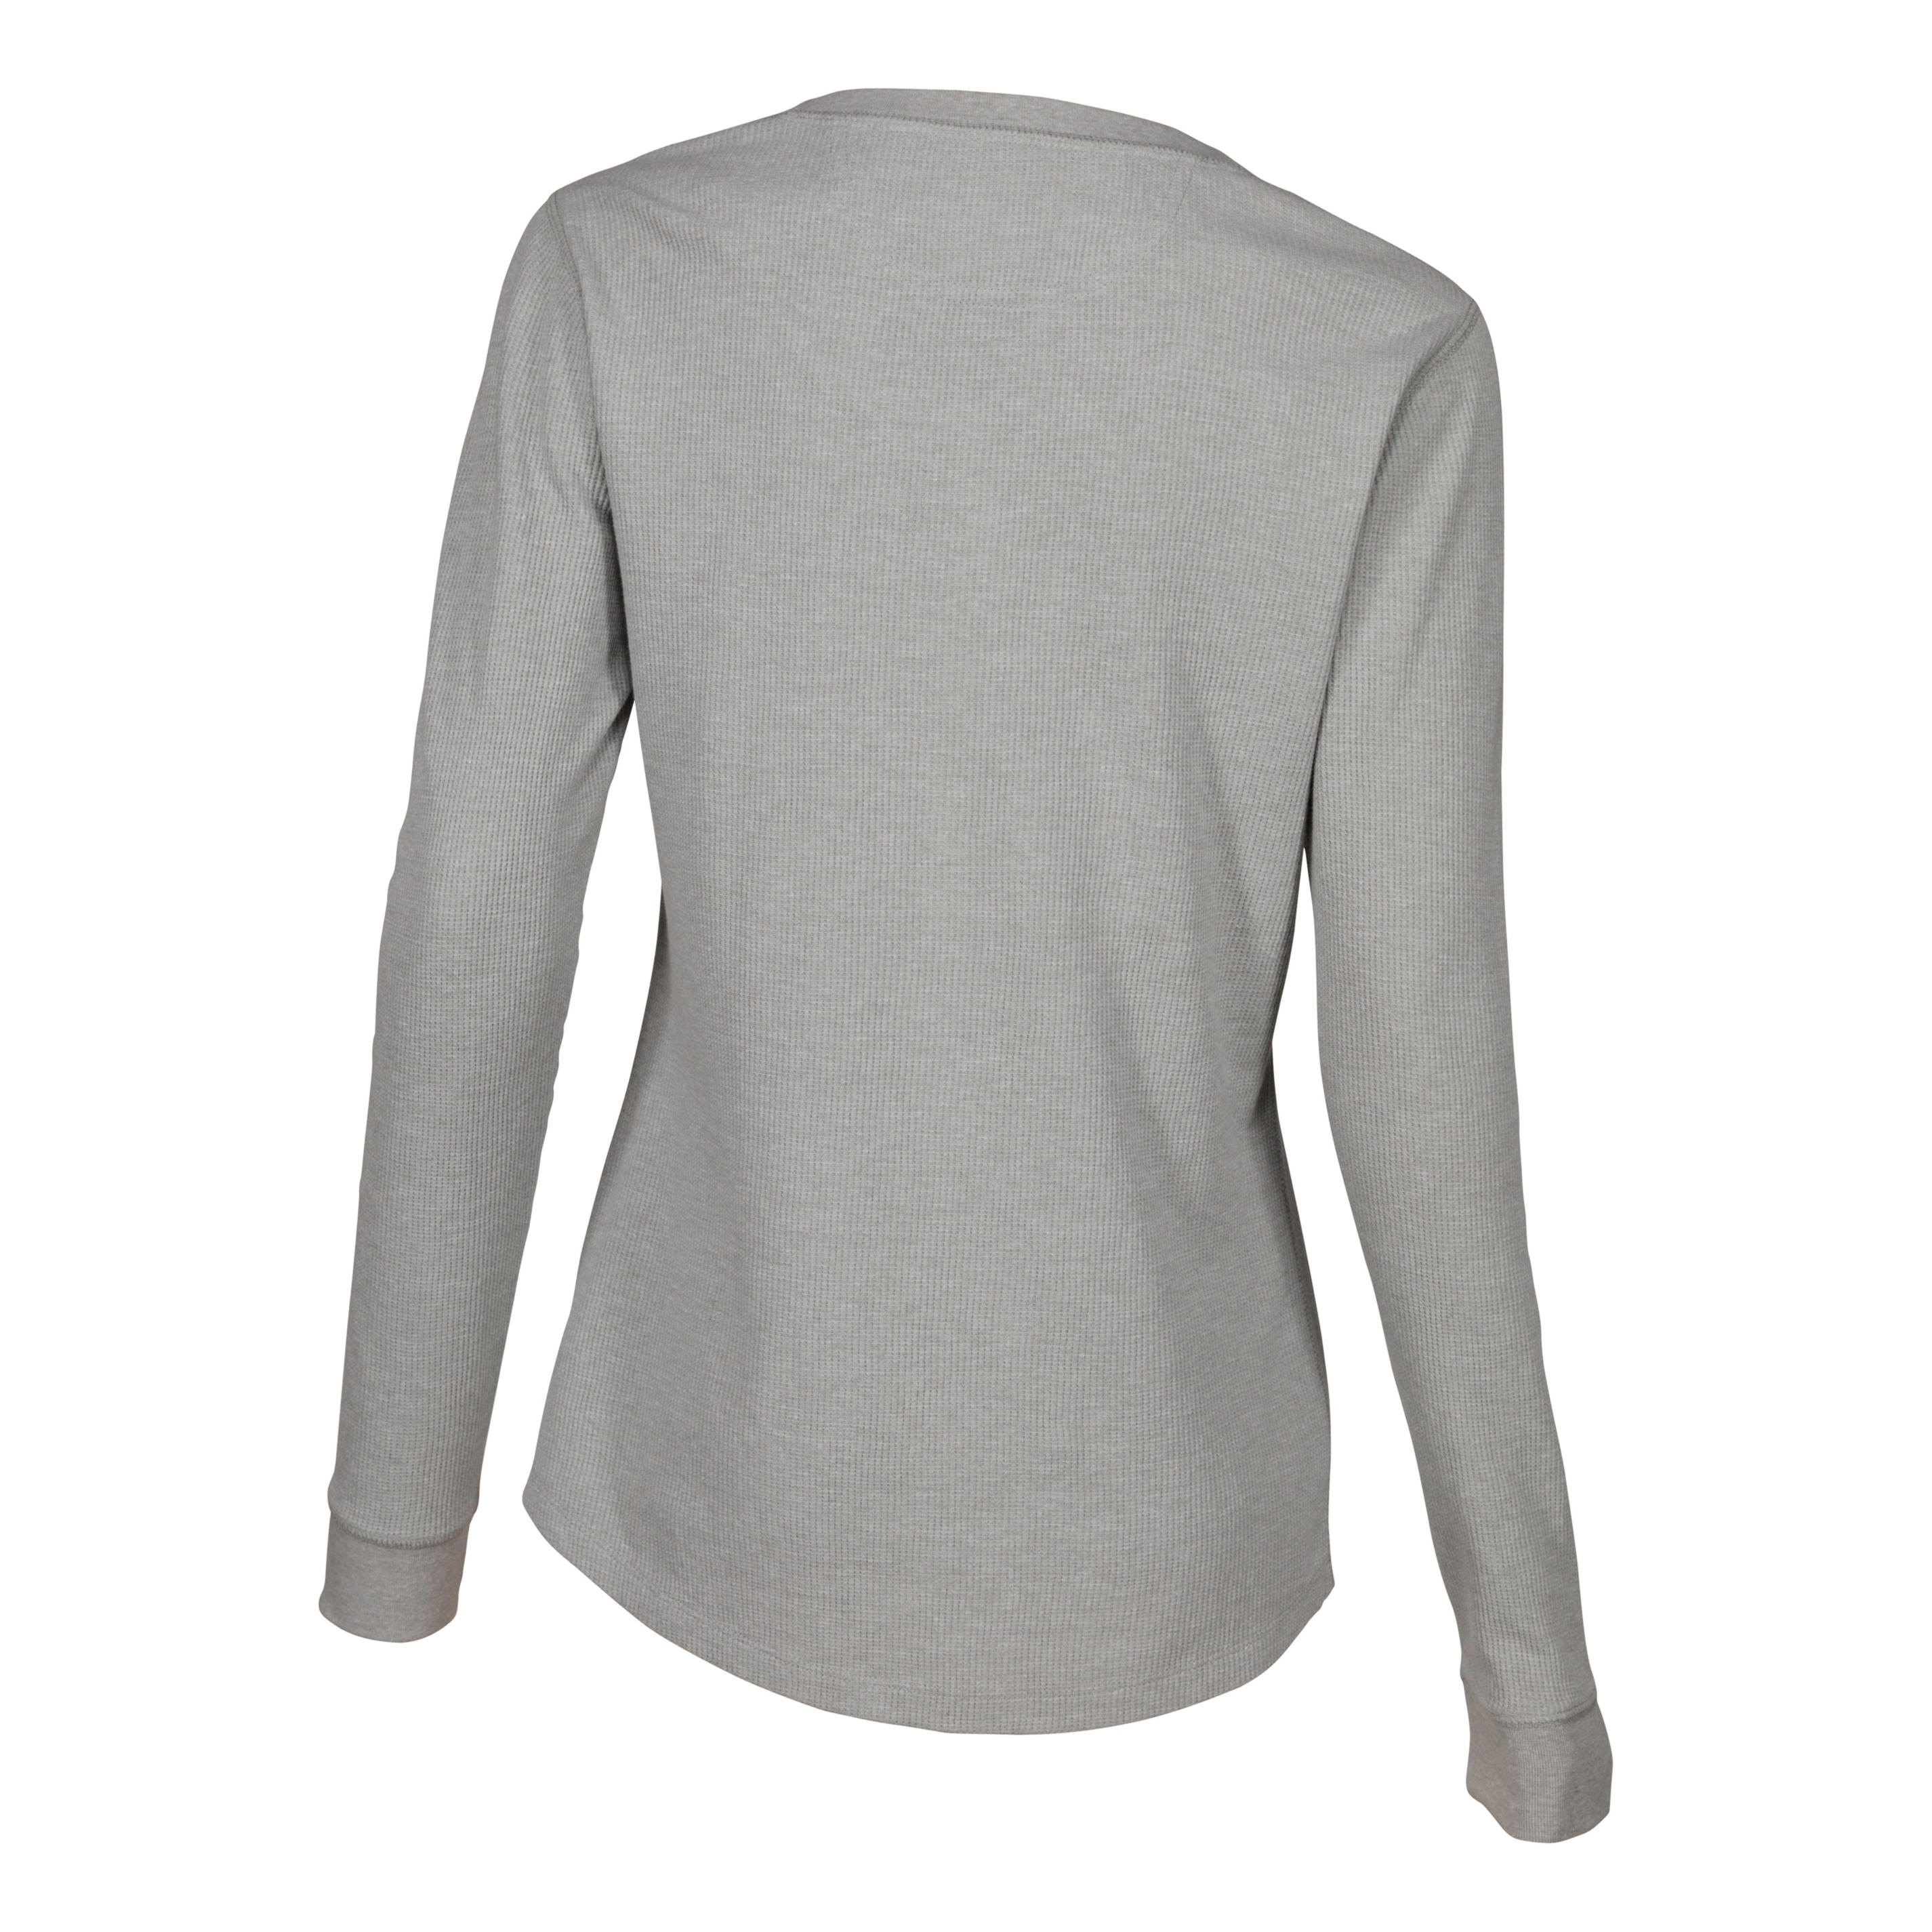 Natural Reflections® Women’s Thermal Henley Shirt - Heather Grey - back